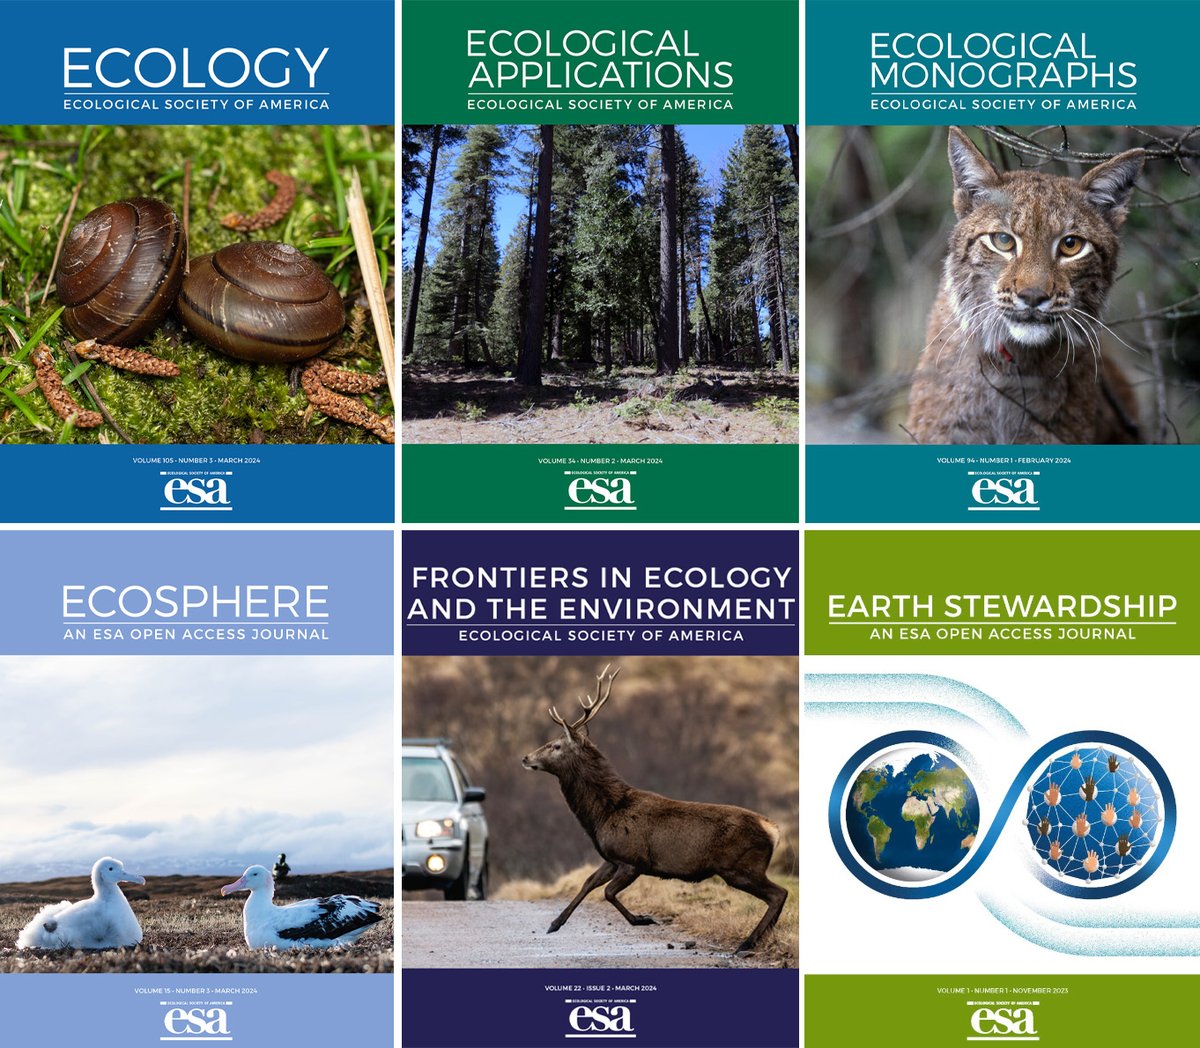 New in the @ESABulletin: ESA presidents past & future discuss today's publishing landscape and offer 2⃣ big reasons to submit your next paper to an ESA journal doi.org/10.1002/bes2.2… @se_hampton @Foggykak @ESAEcology @ESAApplications @ESAMonographs @ESAFrontiers @ESAEcosphere